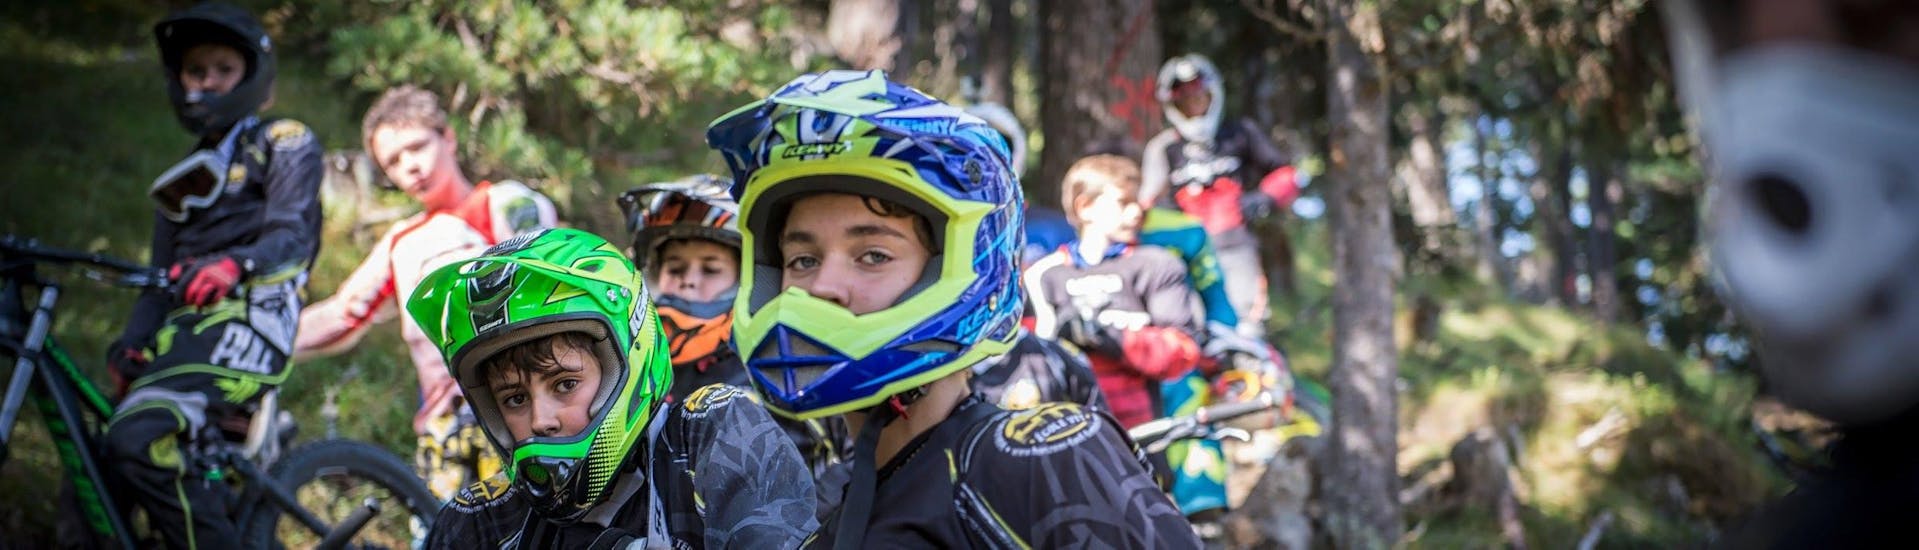 Bikers Mountain Bike Training for Kids (7-10 y.) with Horizons Tout Terrain Les Orres - Hero image